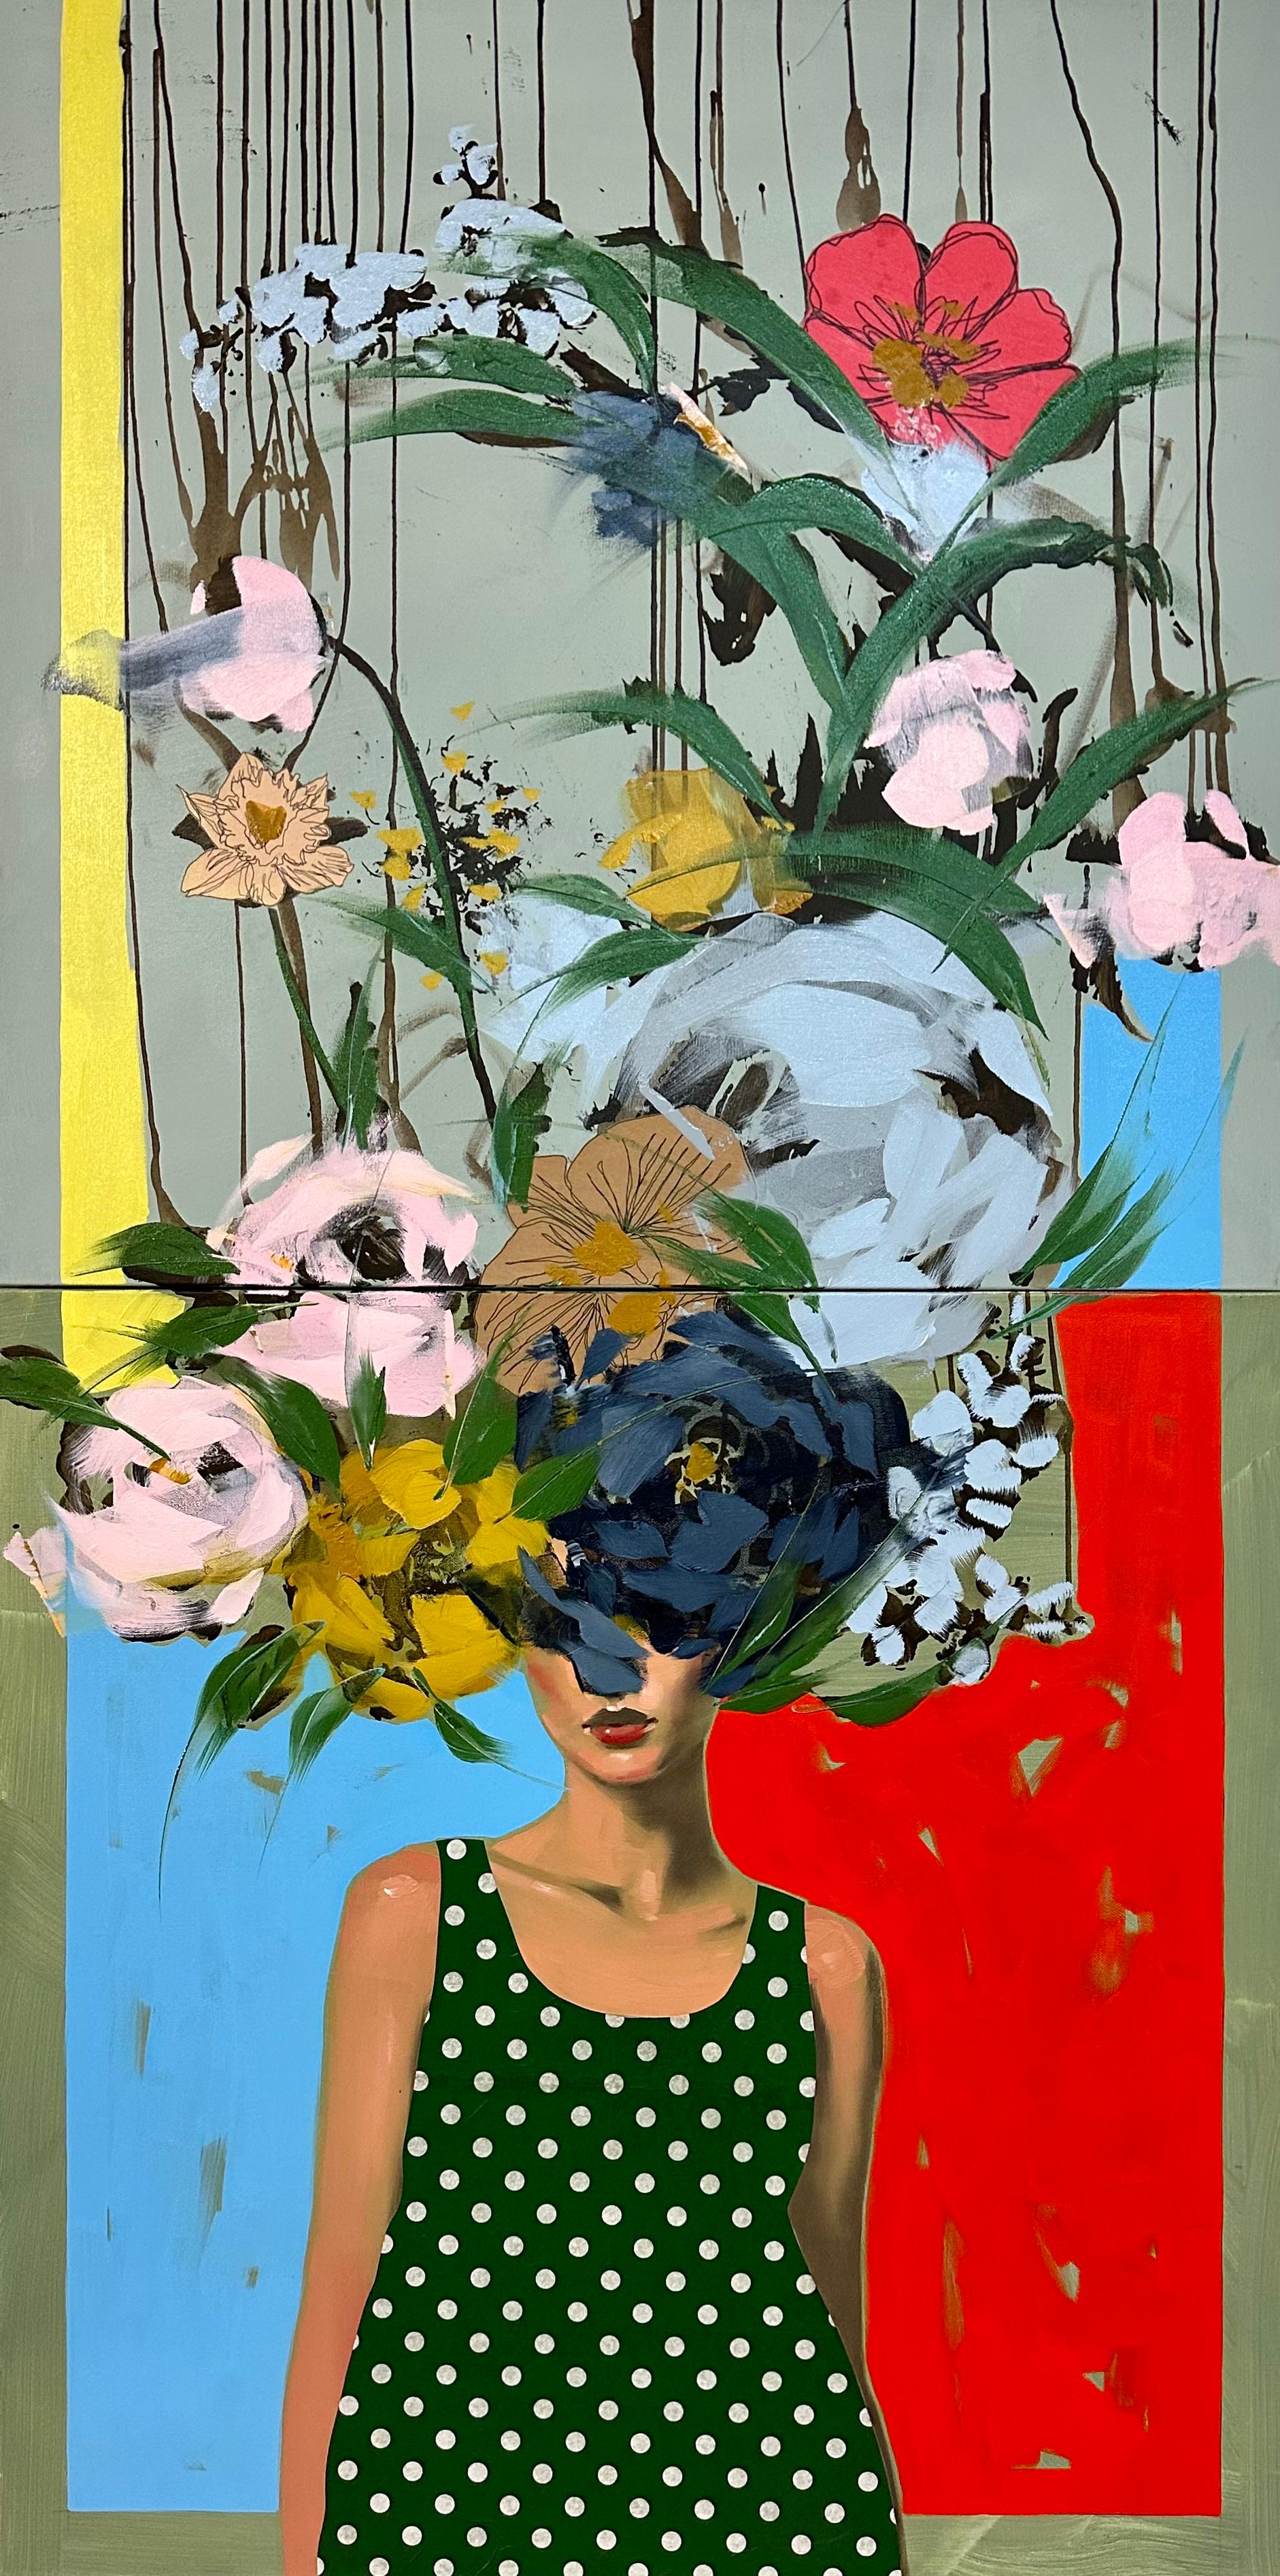 ANNA KINCAIDE
"A Way To Escape (Diptych)"
Oil & Mixed Media on Canvas
72 x 36 inches

Communicating emotion and narrative with limited assistance from her figure’s facial expressions, Anna Kincaide creates cascades of flowers that cover her subjects